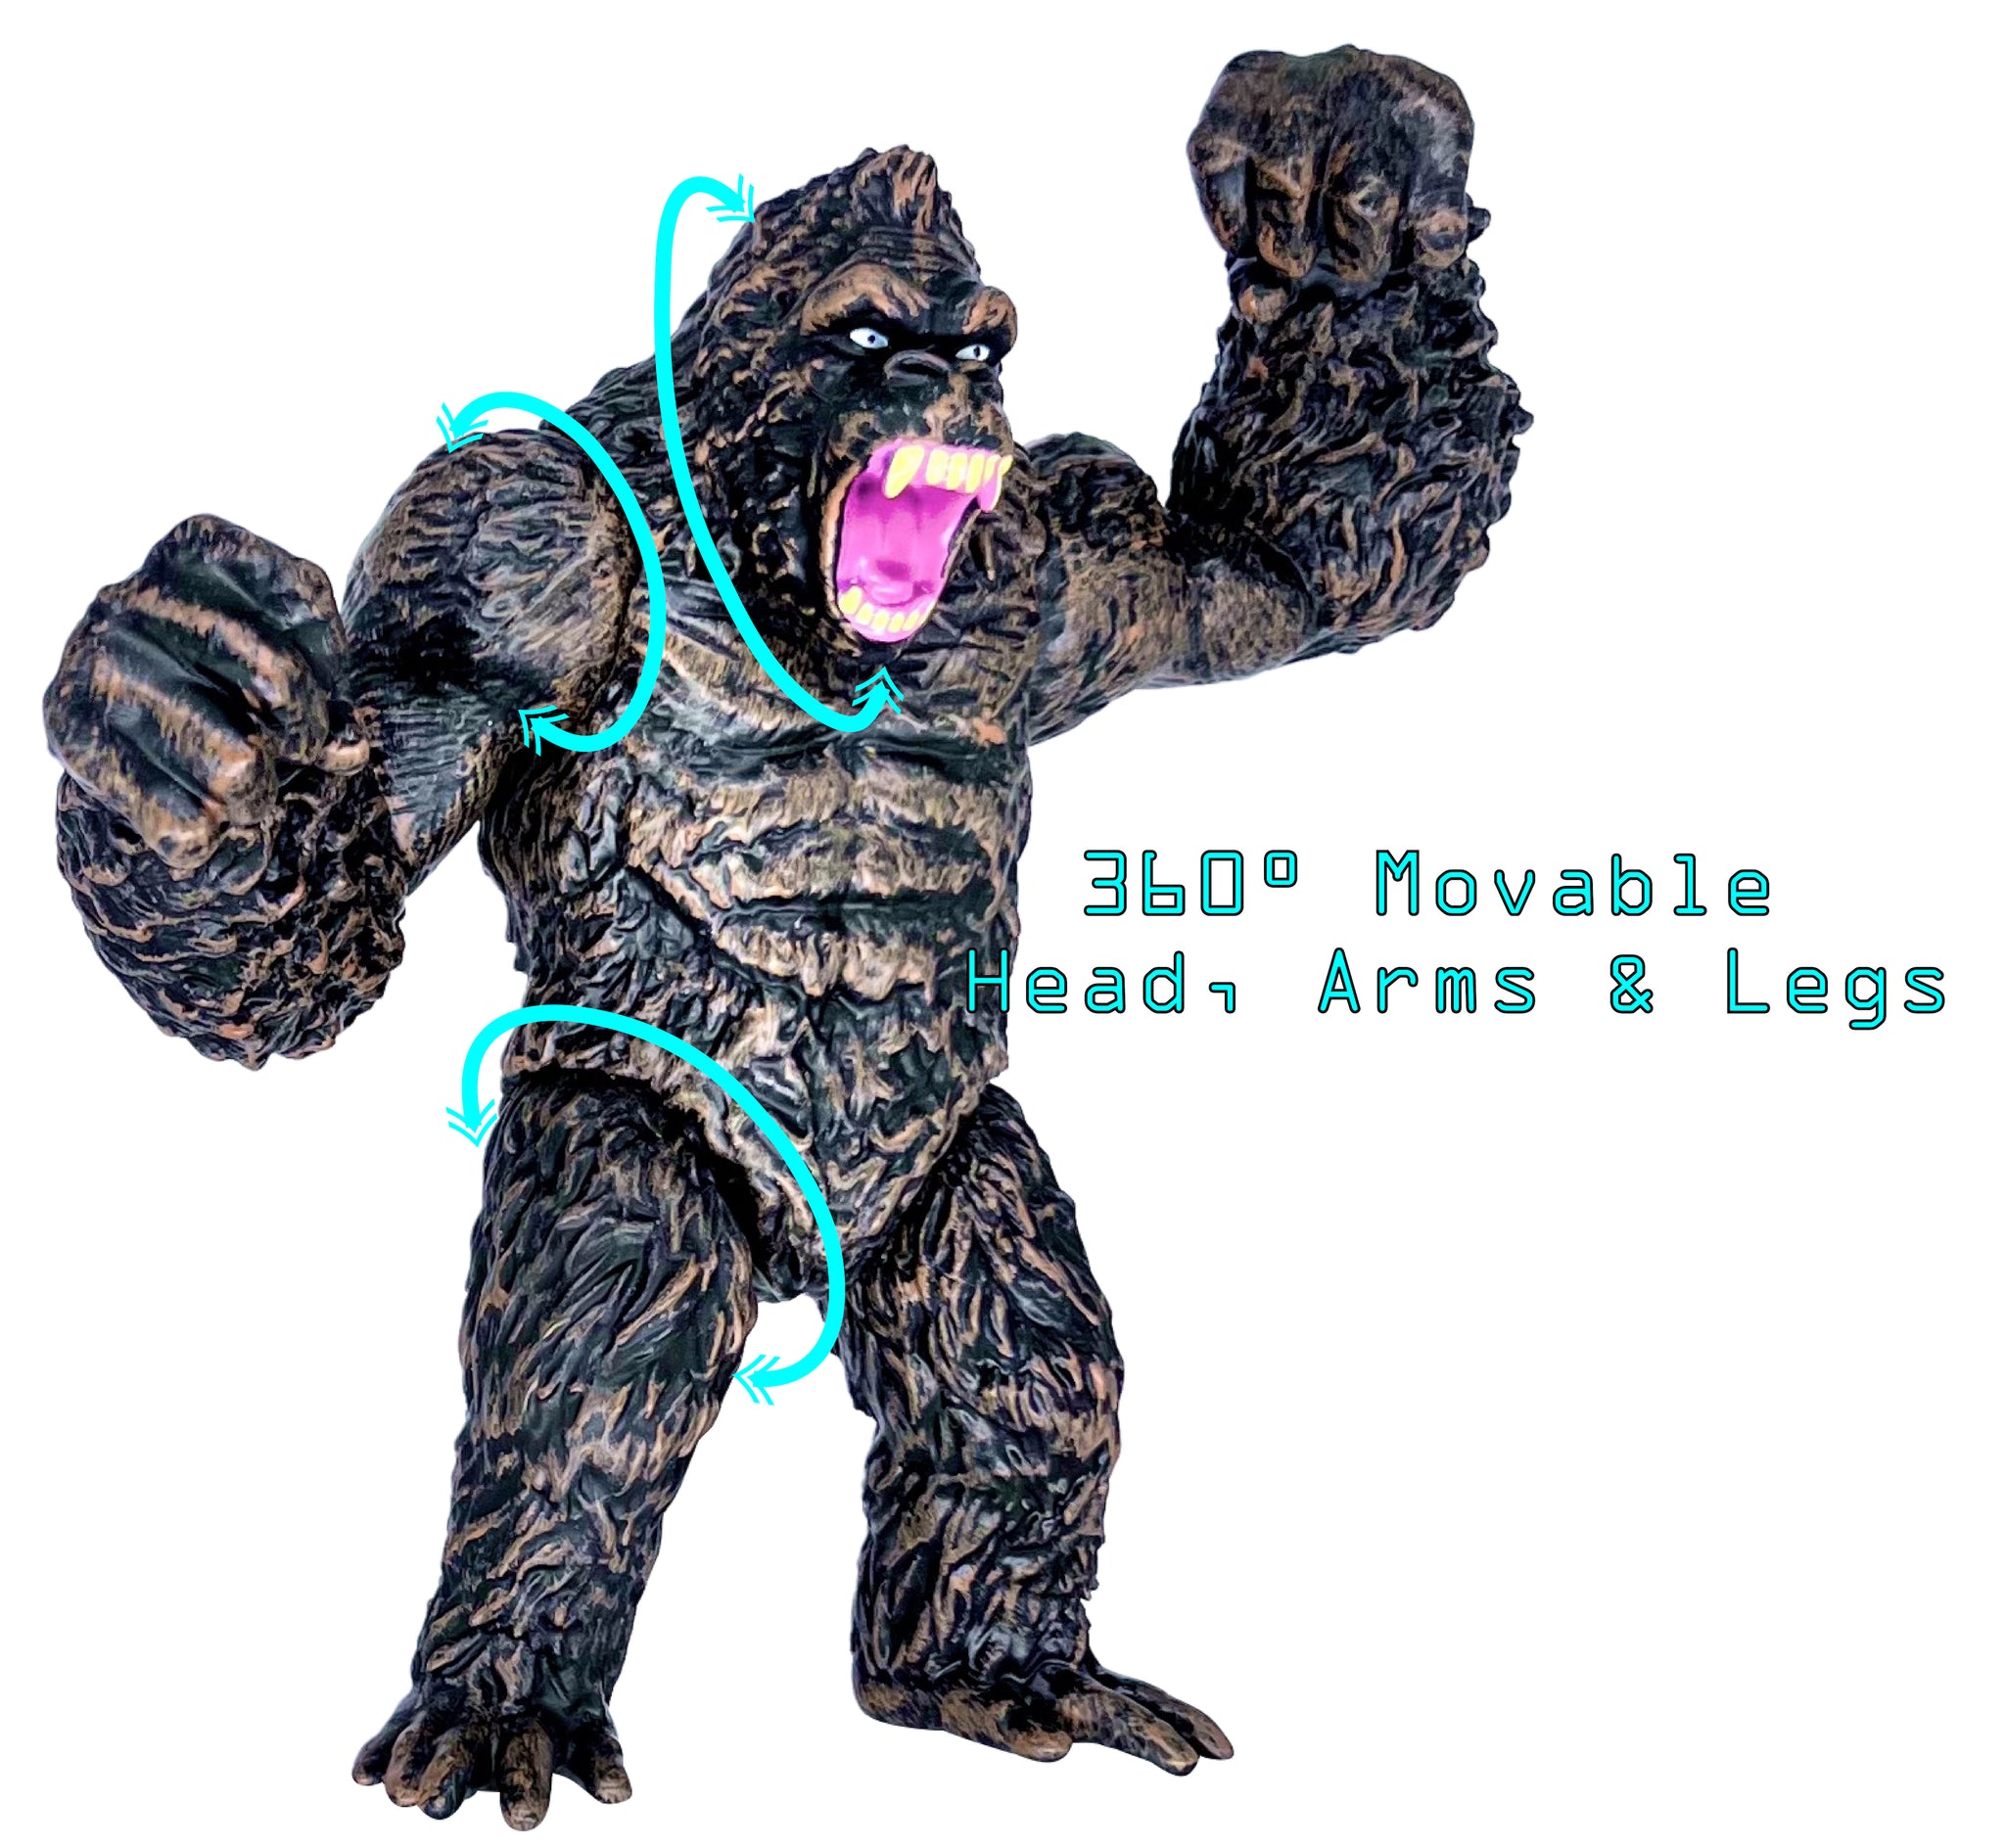 TwCare Set of 2 Godzilla Figure King of The Monsters vs King Kong Toys, Movable Joints Action Movie Series Soft Vinyl Toy Figures, Travel Bag